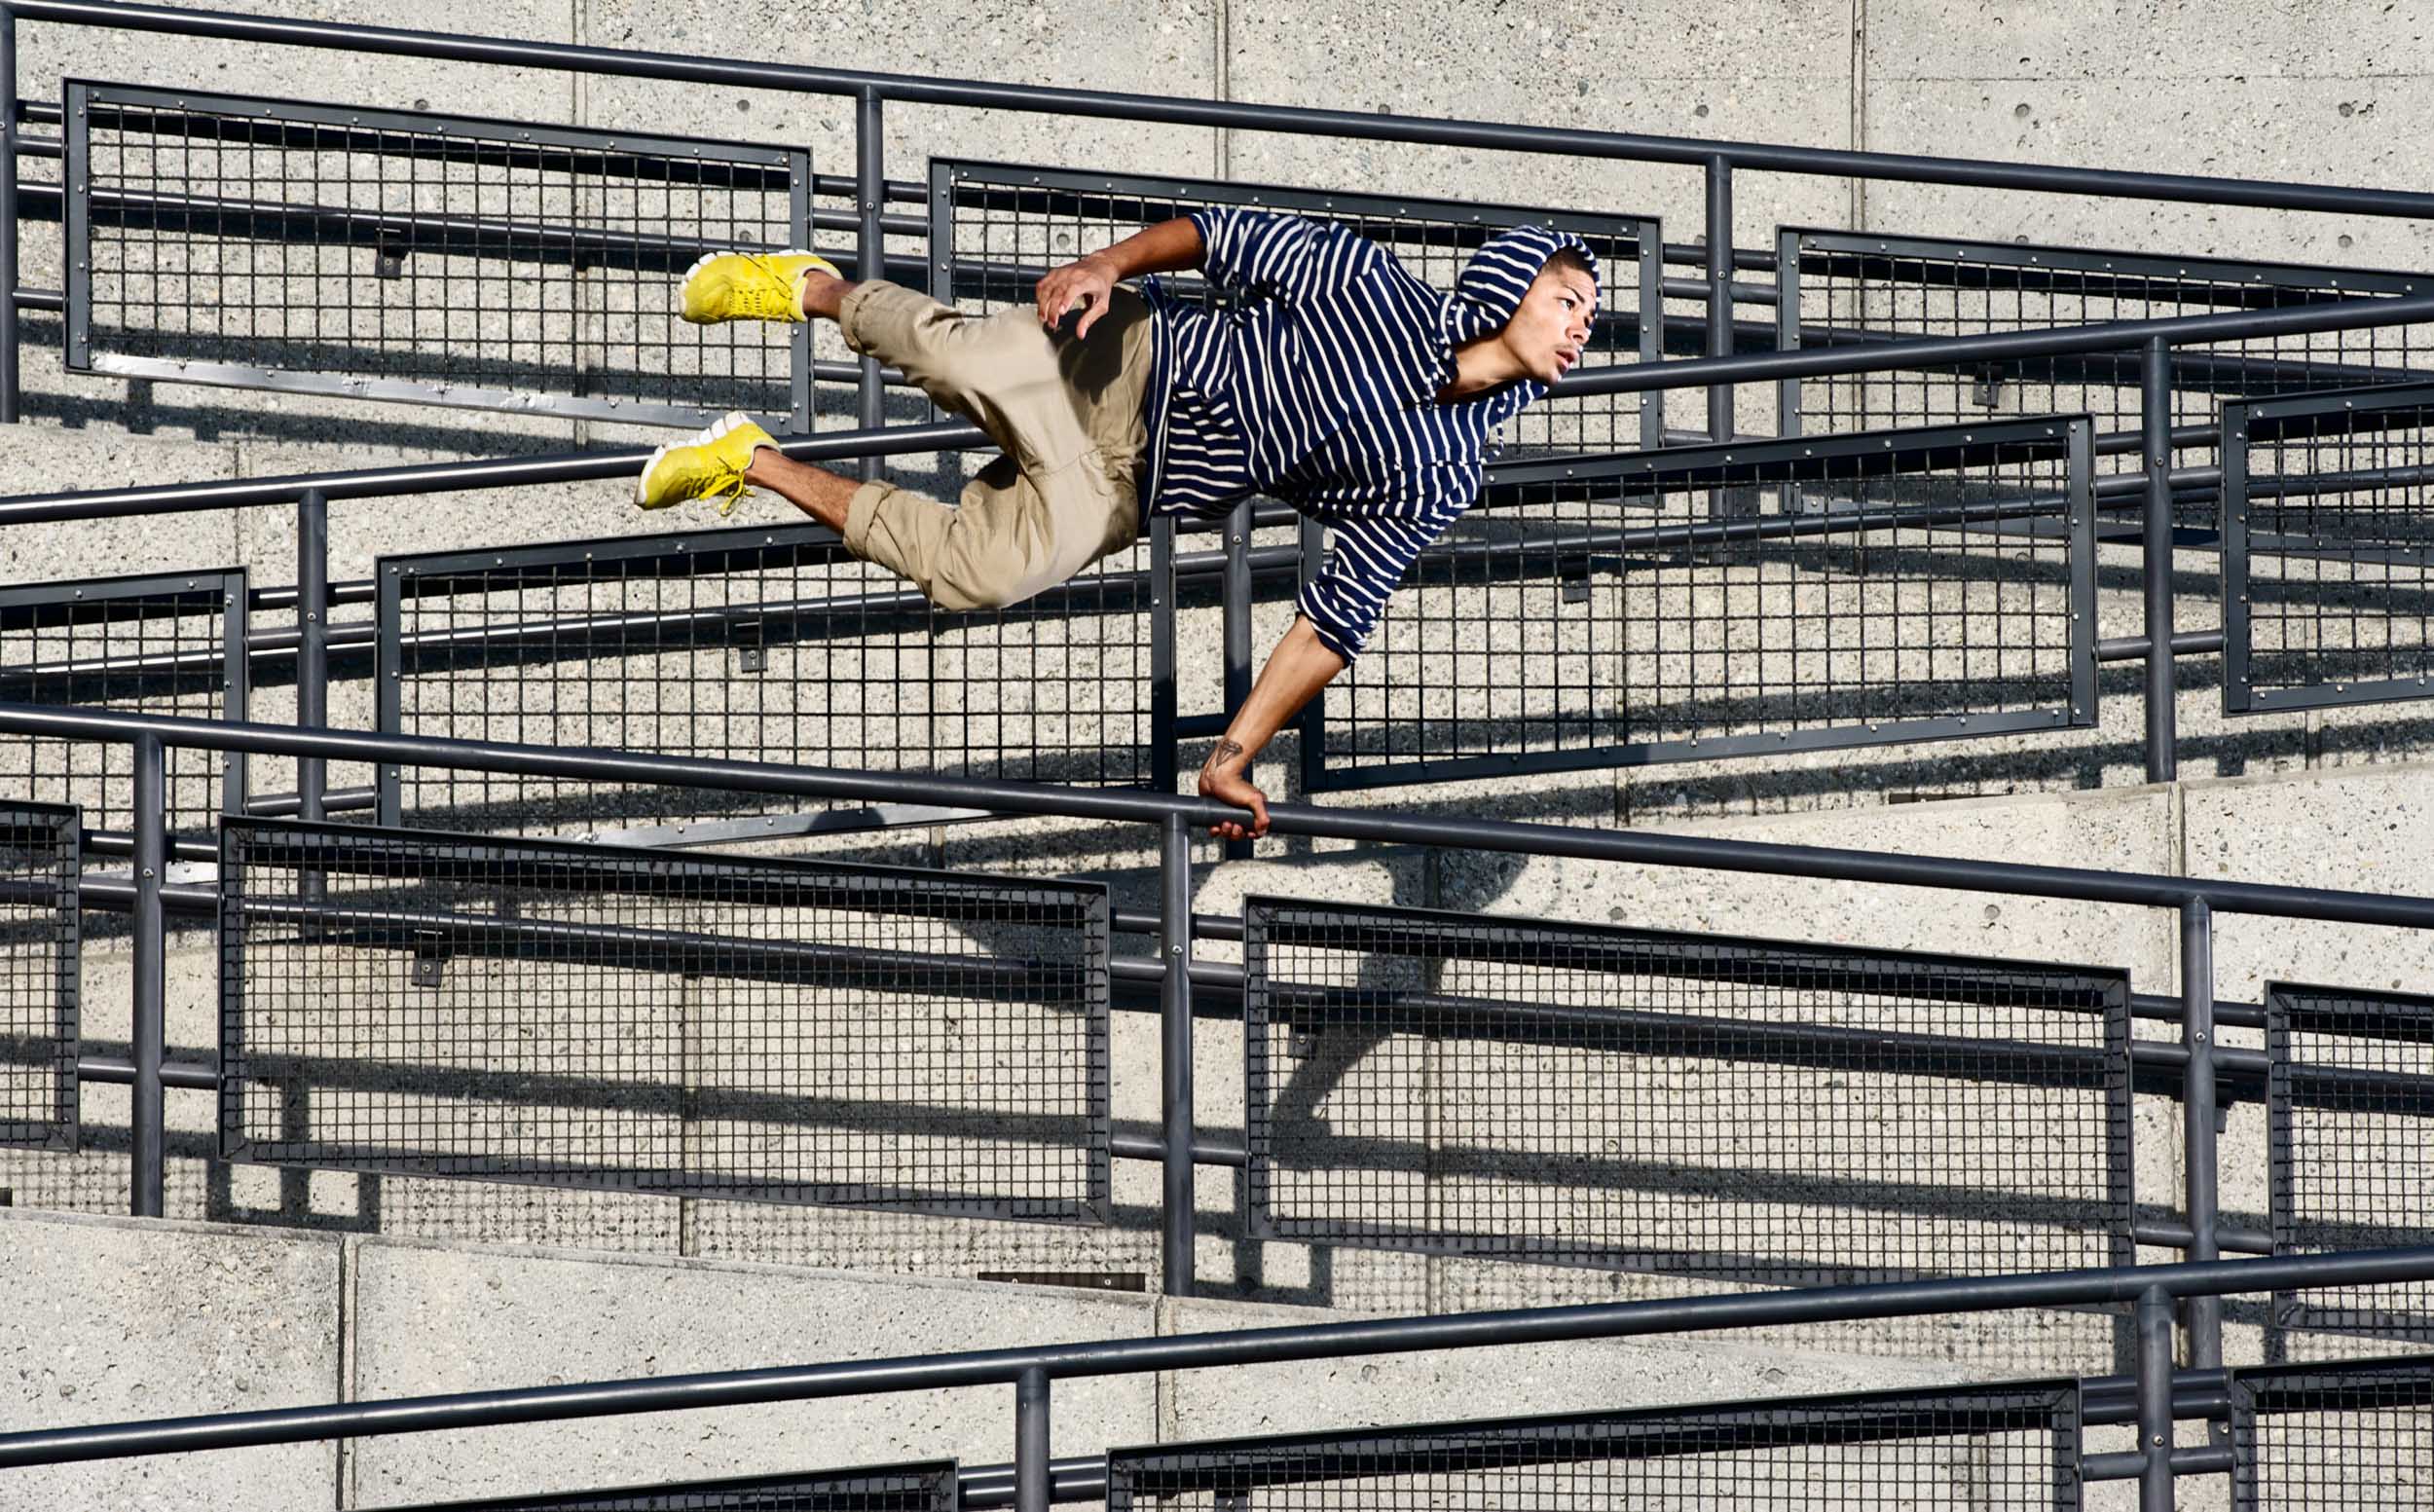 Los Angeles Corporate and Commercial photographer - An active lifestyle portrait of a parkour athlete in Los Angeles